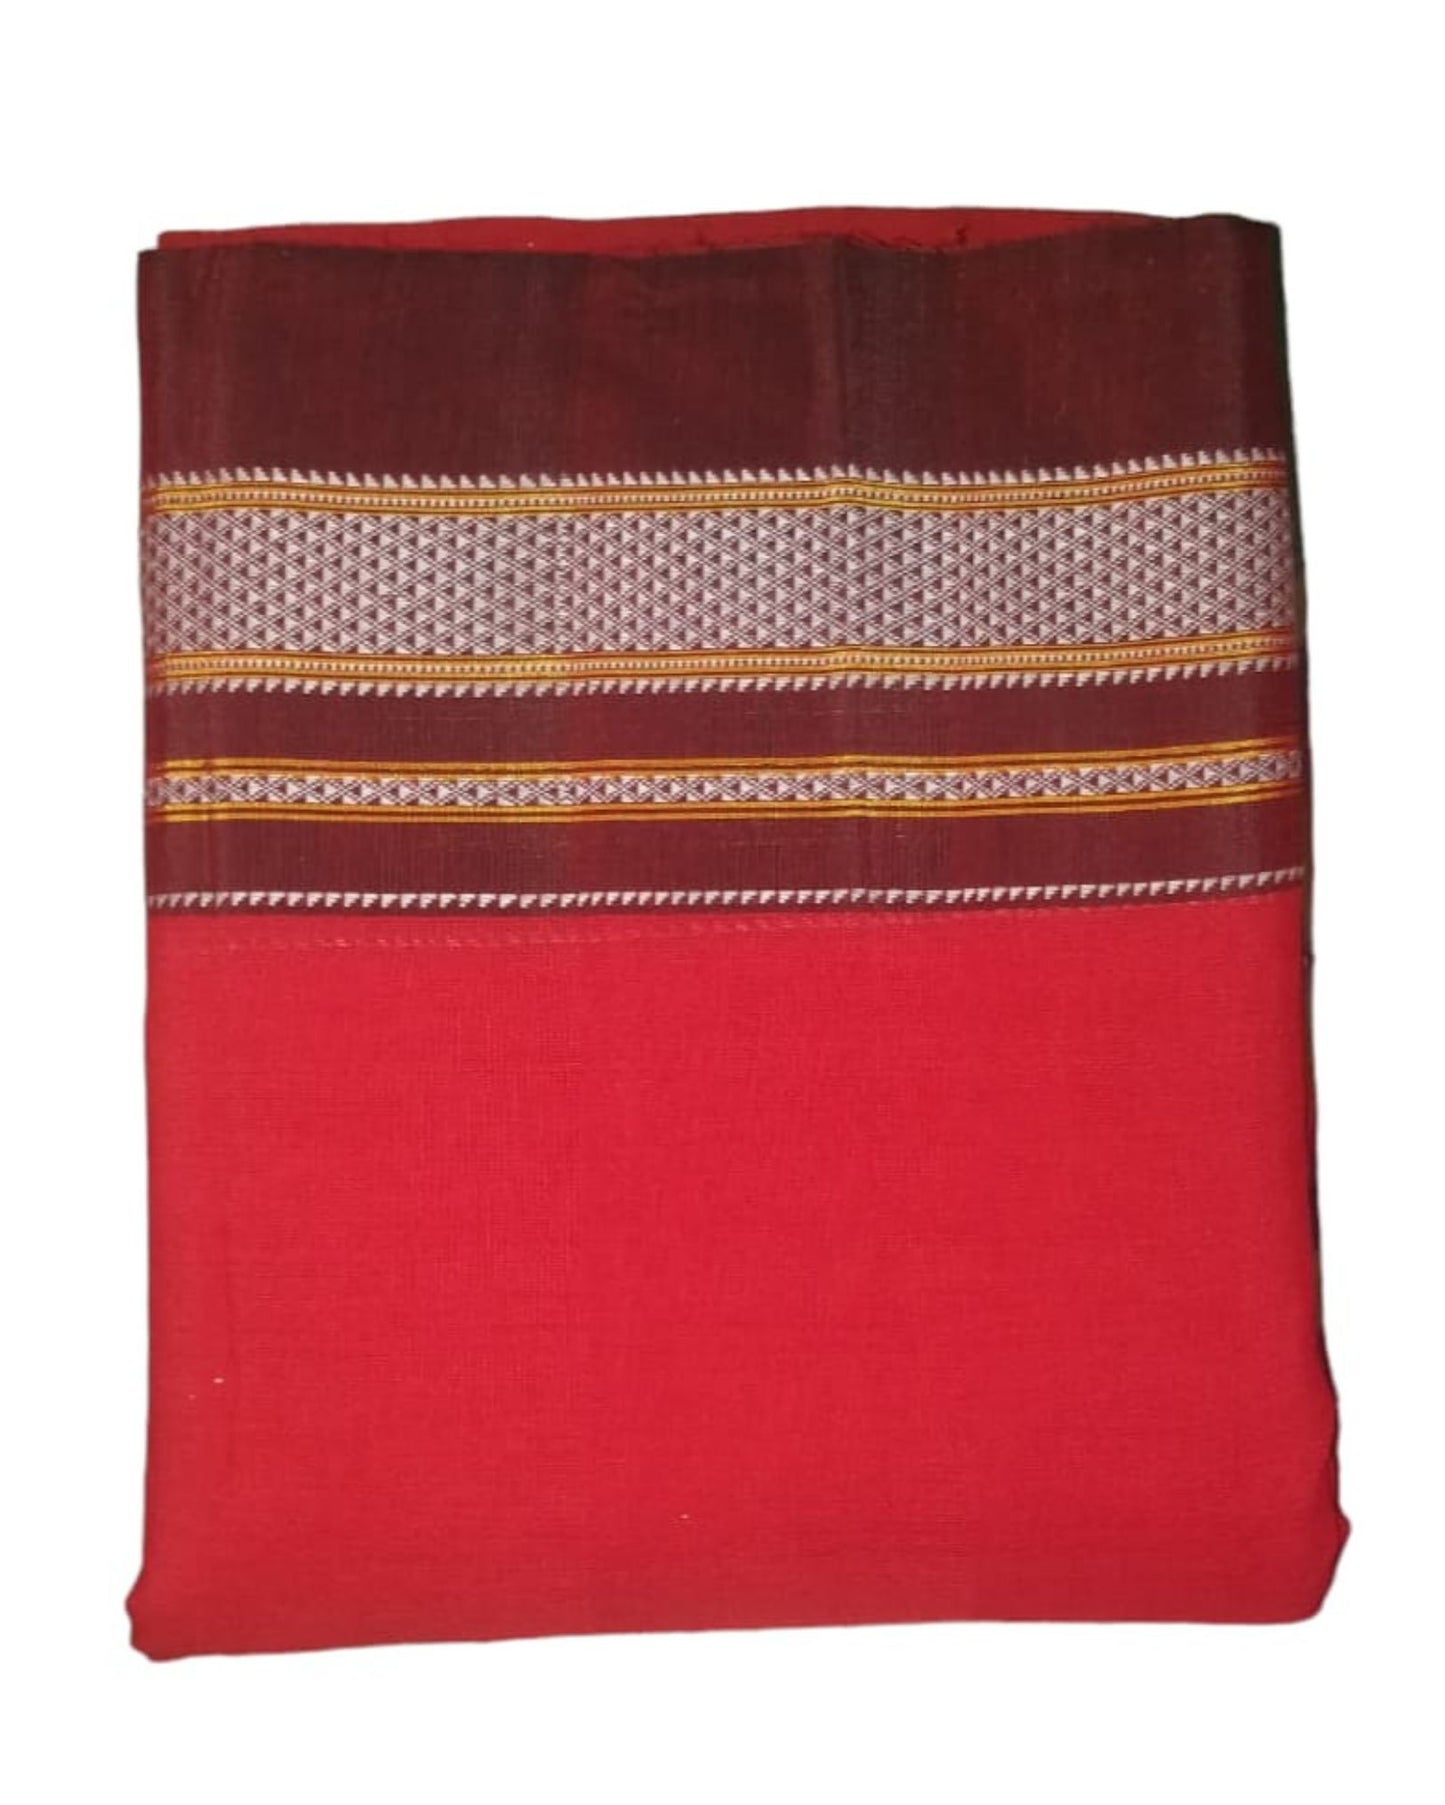 Pure Cotton Handloom Ilkal Saree Red Color with running blouse - IndieHaat